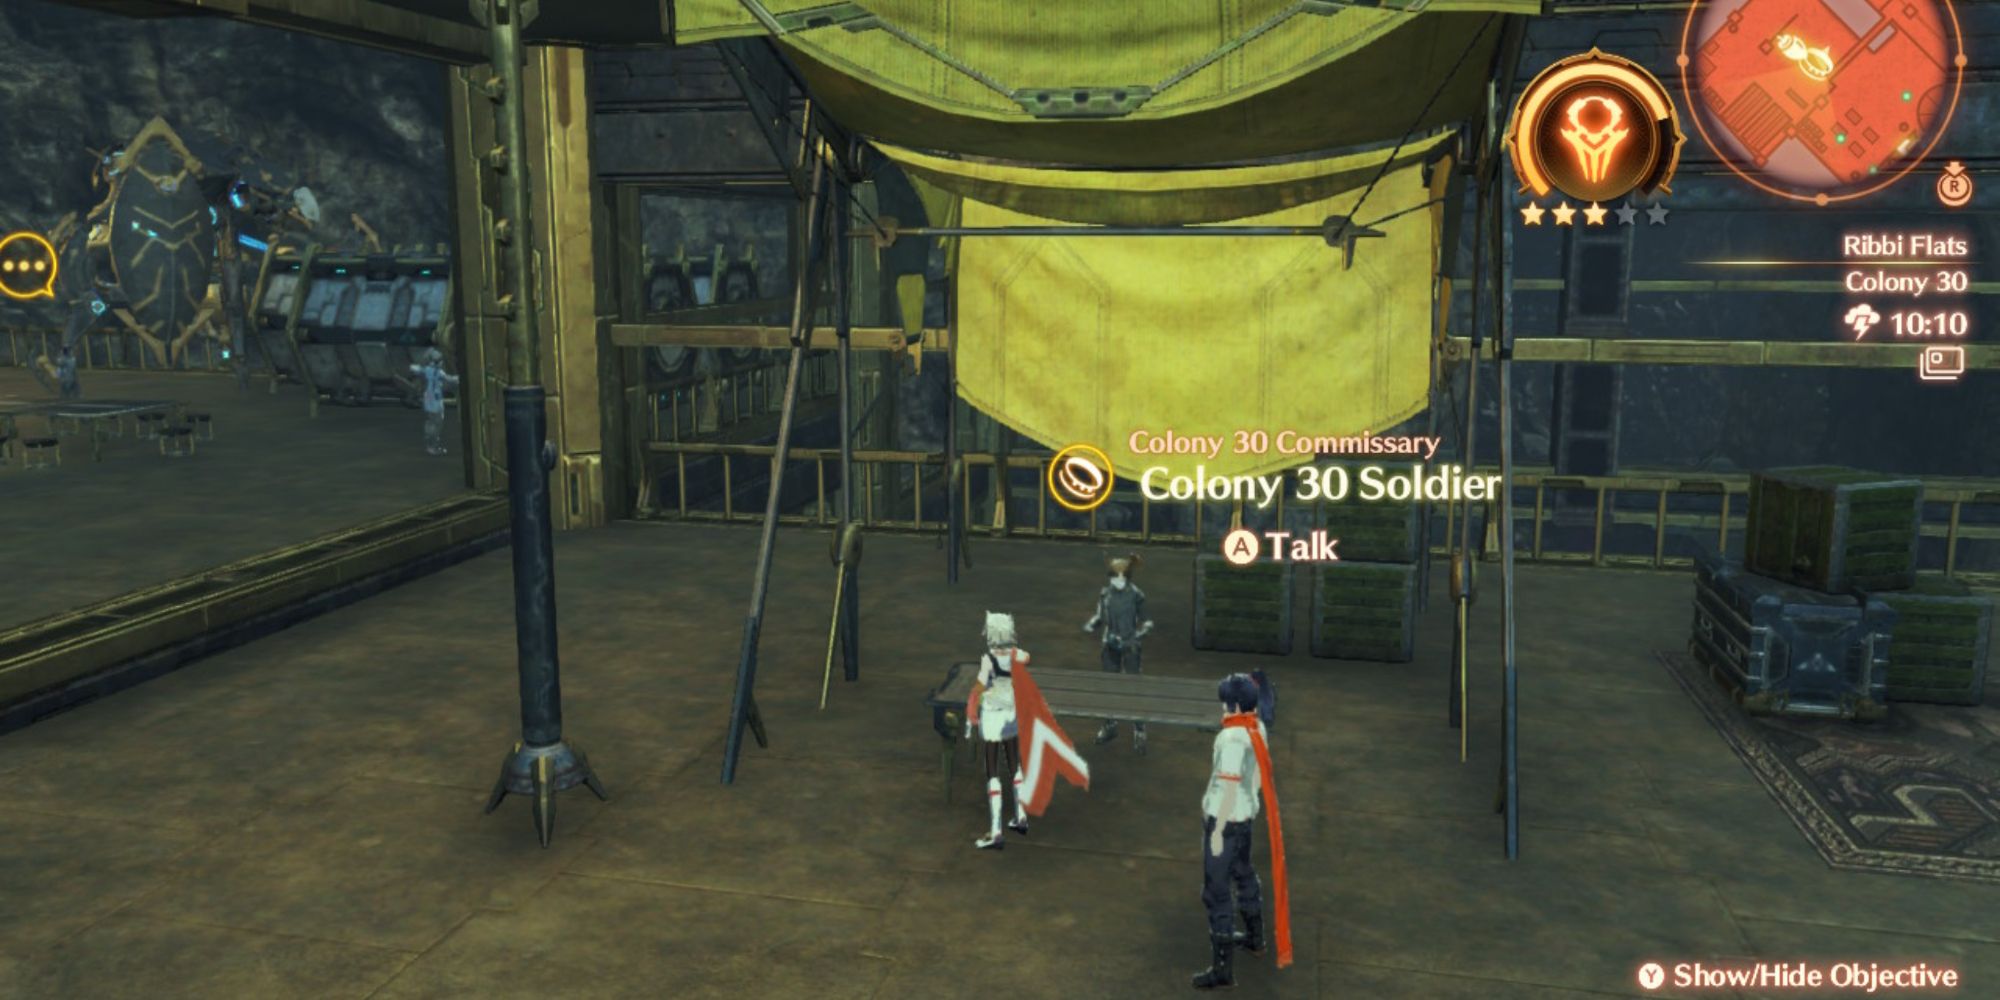 A Commissary in Xenoblade Chronicles 3